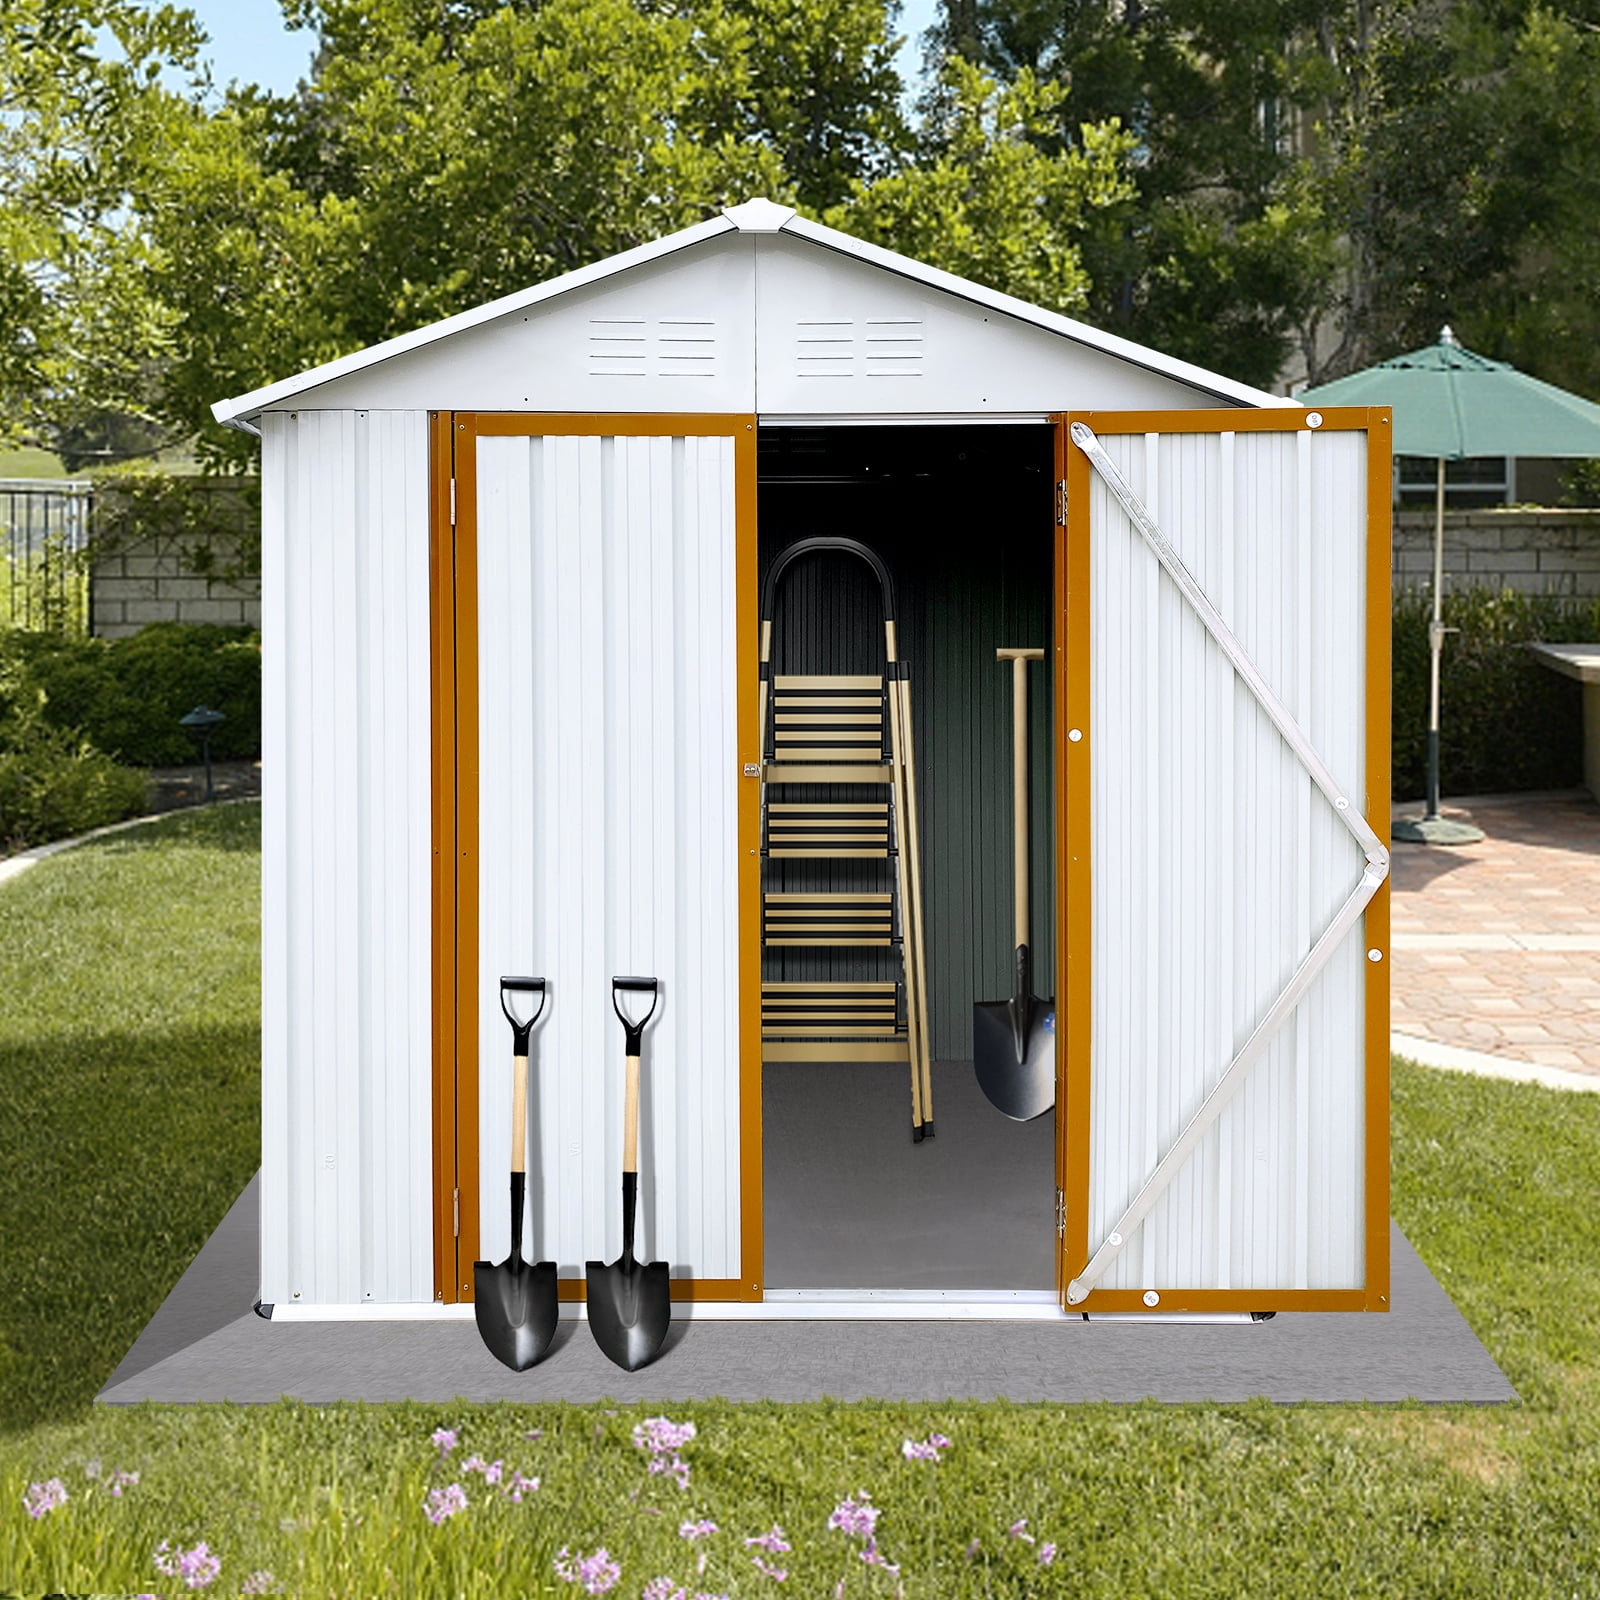 7x5 ft Outdoor Storage Shed with Sliding Lockable Door and Vents, Metal  Garden Shed Tool Bike Shed Pet House Garbage Room for Backyard, Patio,  Lawn, White 